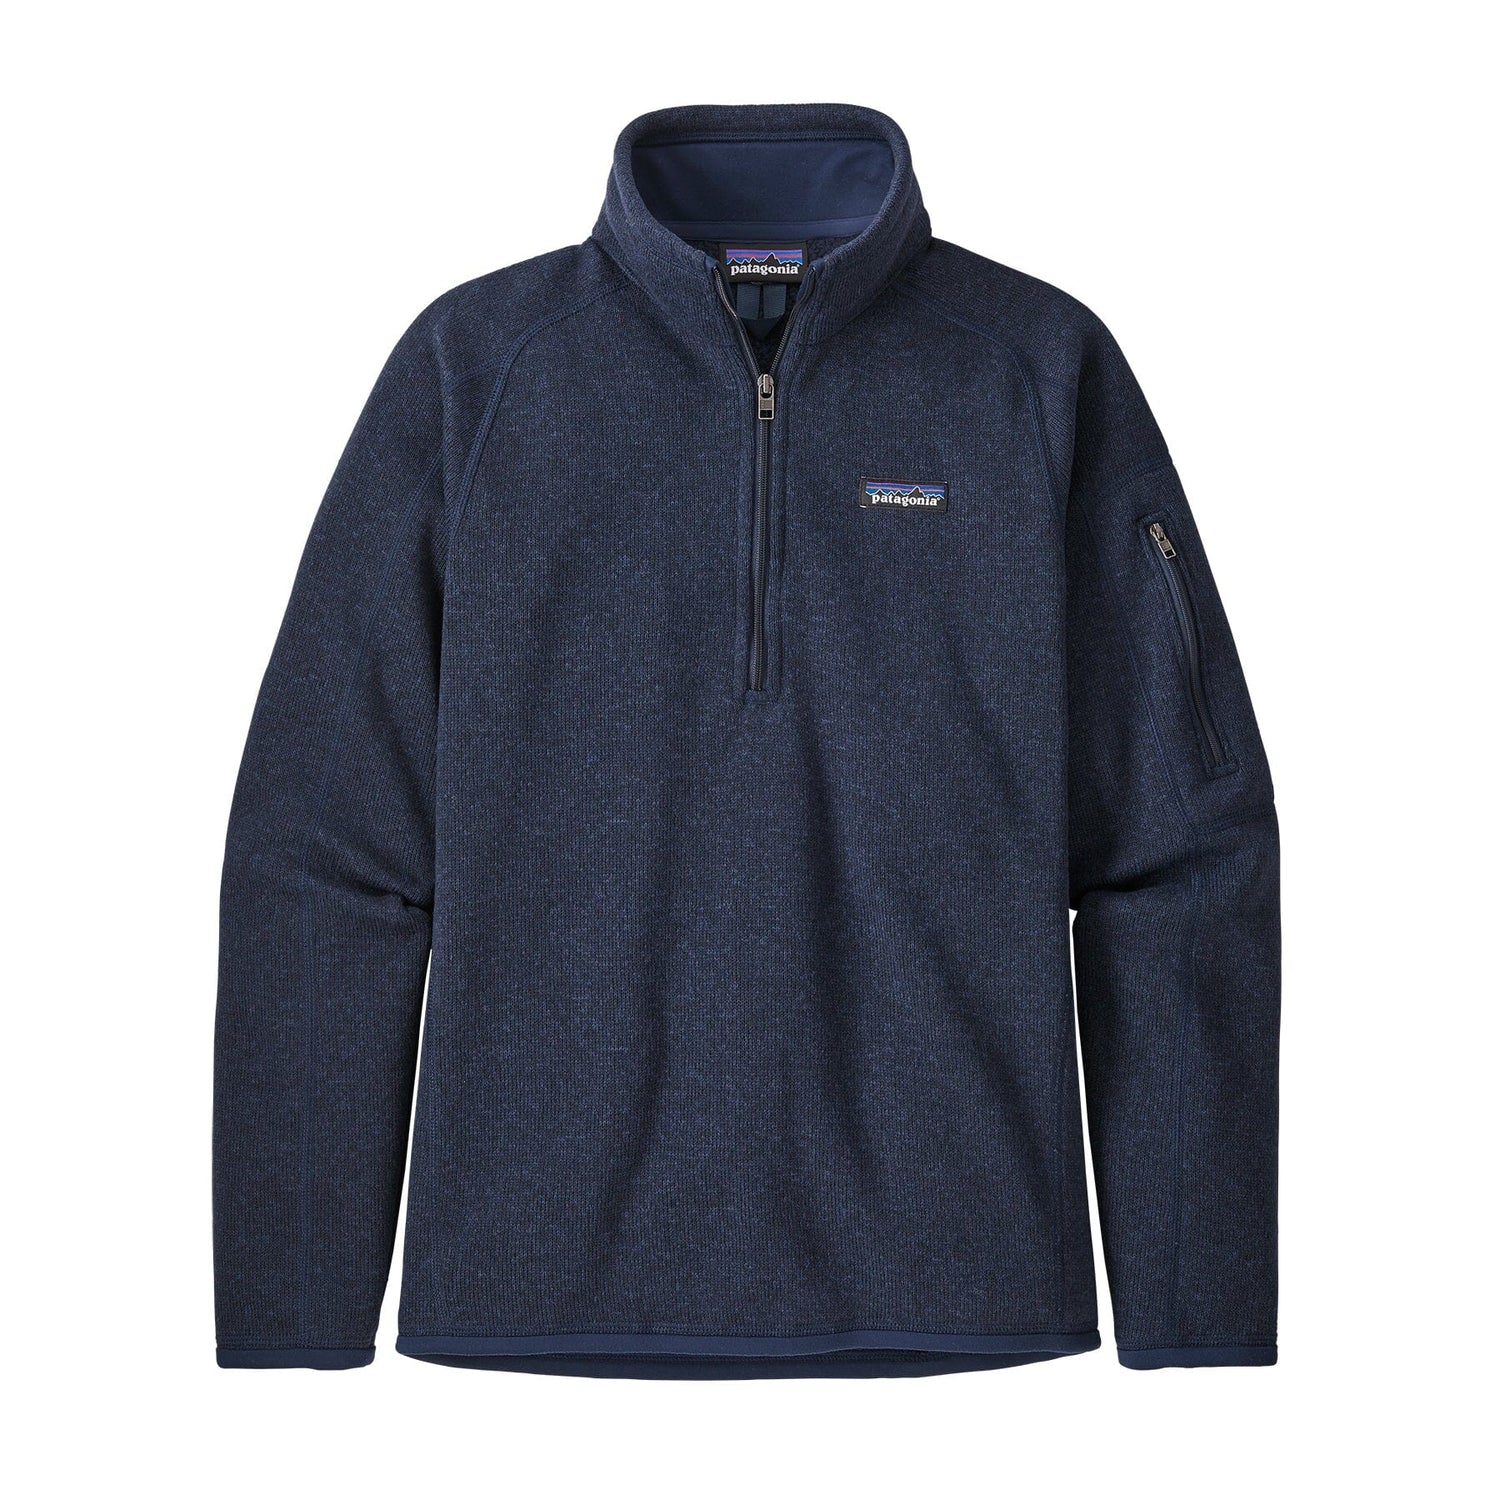 Patagonia W's Better Sweater 1/4 Zip Fleece - Recycled polyester New Navy Shirt